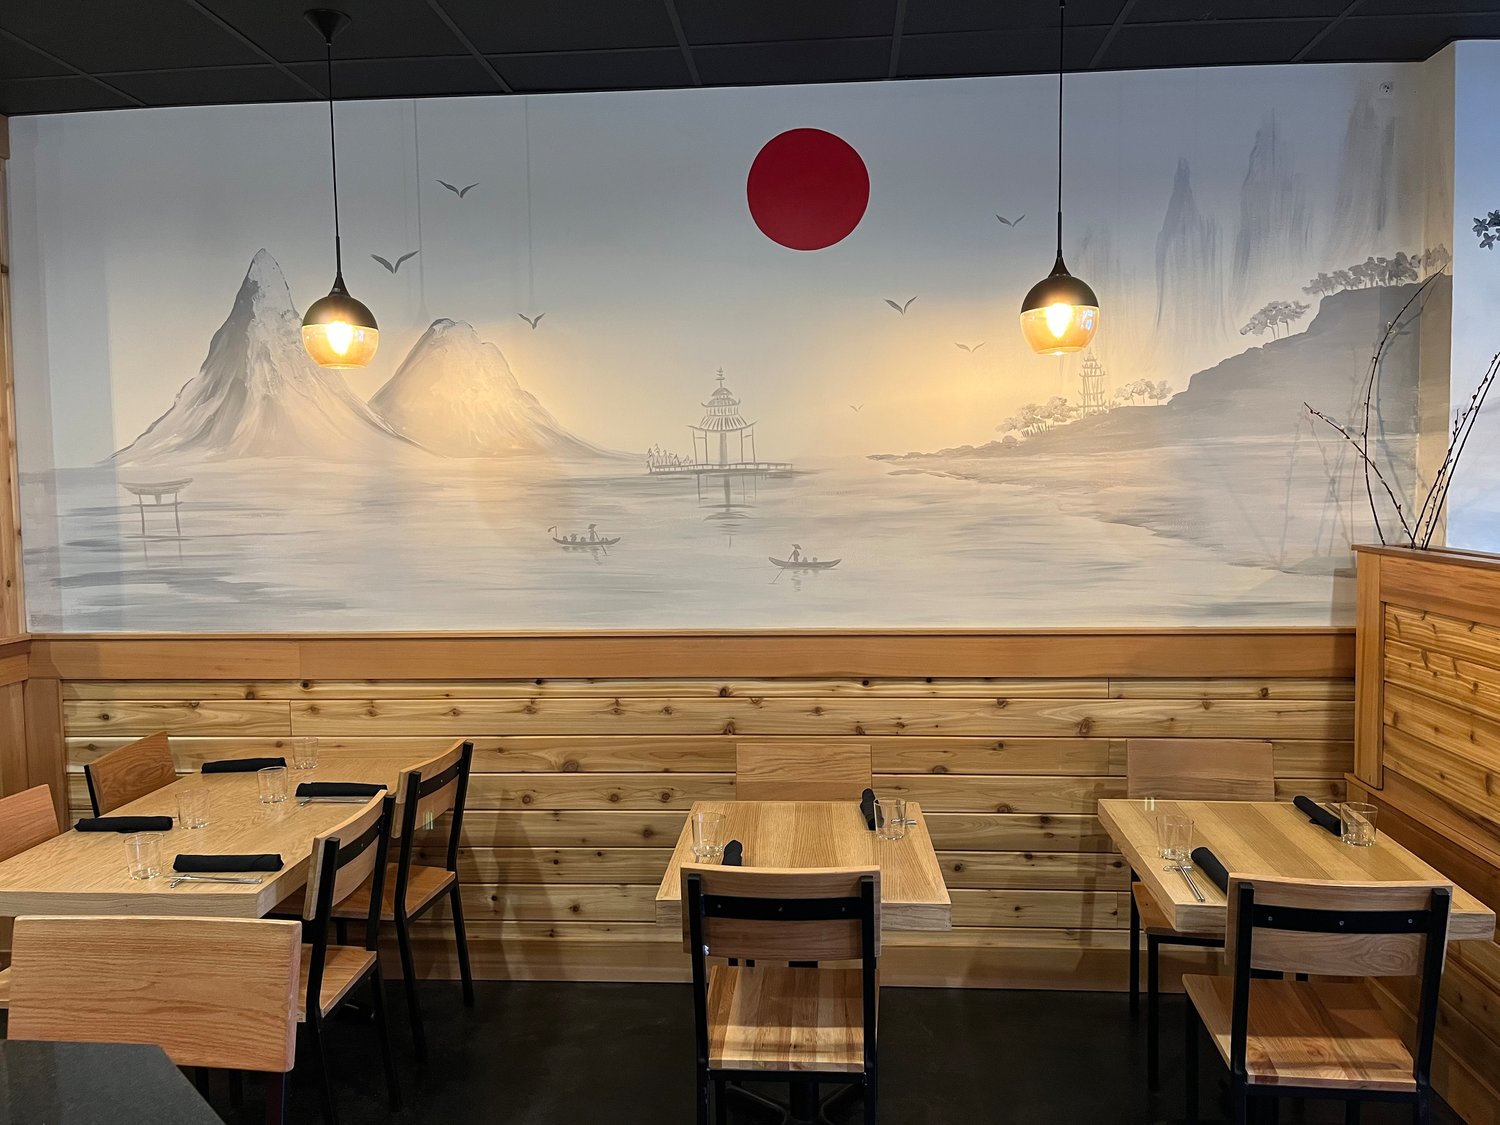 The mural at Danny’s Izakaya, which takes up an entire wall, was painted by @arlenemurals.